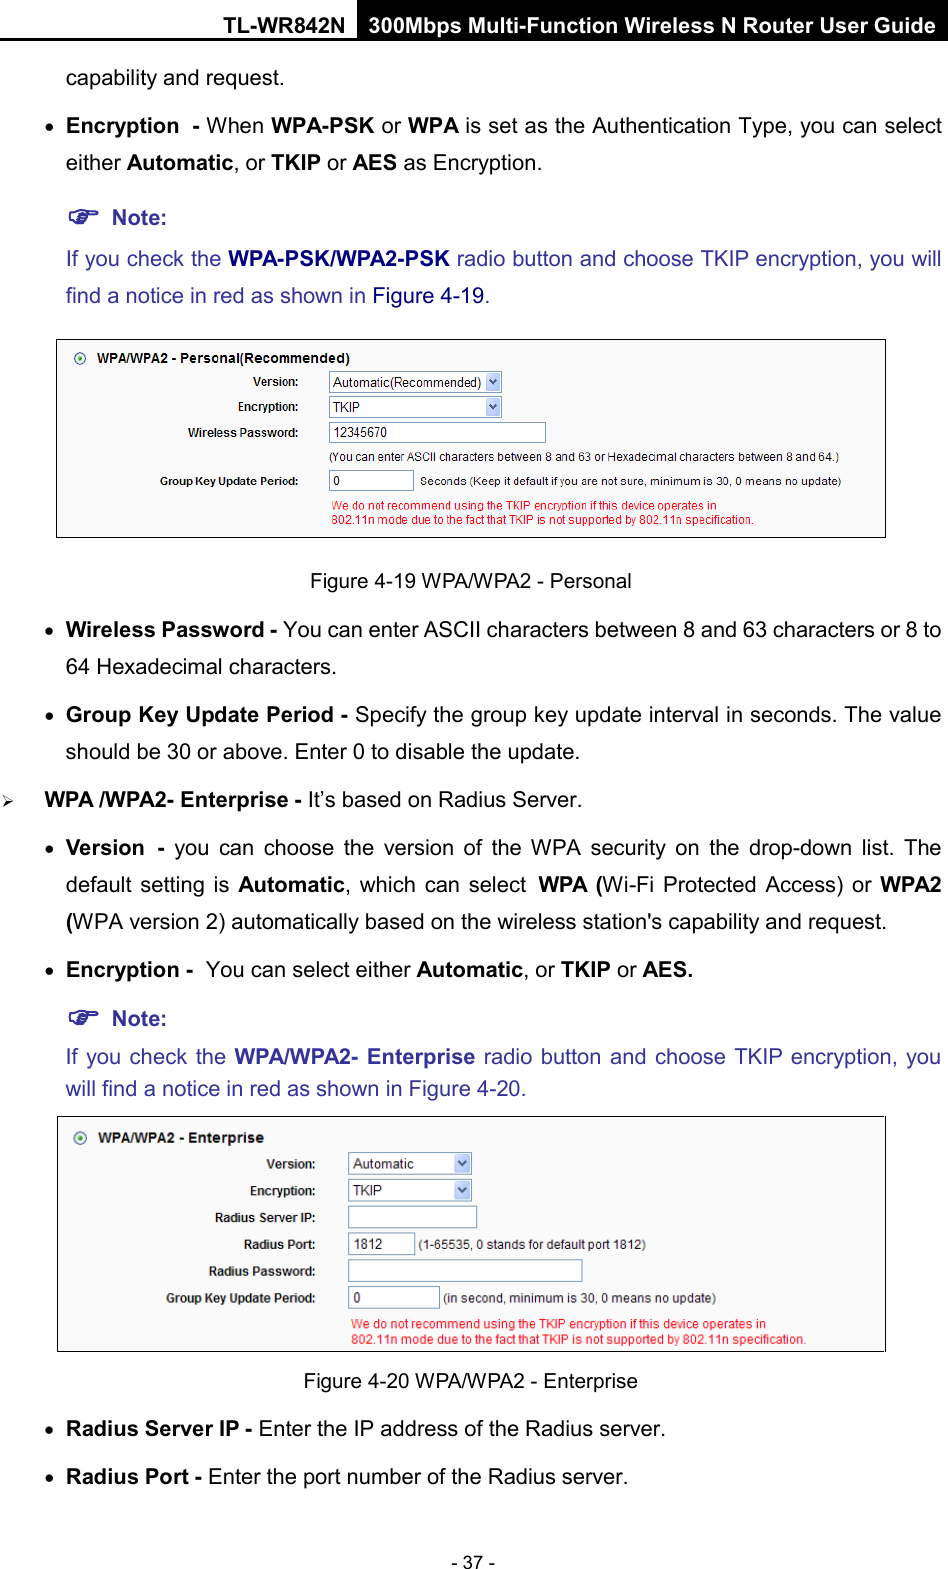 TL-WR842N 300Mbps Multi-Function Wireless N Router User Guide  - 37 - capability and request. • Encryption - When WPA-PSK or WPA is set as the Authentication Type, you can select either Automatic, or TKIP or AES as Encryption.  Note:   If you check the WPA-PSK/WPA2-PSK radio button and choose TKIP encryption, you will find a notice in red as shown in Figure 4-19.  Figure 4-19 W PA/W PA2 - Personal • Wireless Password - You can enter ASCII characters between 8 and 63 characters or 8 to 64 Hexadecimal characters. • Group Key Update Period - Specify the group key update interval in seconds. The value should be 30 or above. Enter 0 to disable the update.  WPA /WPA2- Enterprise - It’s based on Radius Server. • Version - you can choose the version of the WPA security on the drop-down list. The default setting is Automatic, which can select WPA  (Wi-Fi Protected Access) or  WPA2 (WPA version 2) automatically based on the wireless station&apos;s capability and request. • Encryption - You can select either Automatic, or TKIP or AES.  Note: If you check the WPA/WPA2- Enterprise radio button and choose TKIP encryption, you will find a notice in red as shown in Figure 4-20.  Figure 4-20 W PA/W PA2 - Enterprise • Radius Server IP - Enter the IP address of the Radius server. • Radius Port - Enter the port number of the Radius server. 